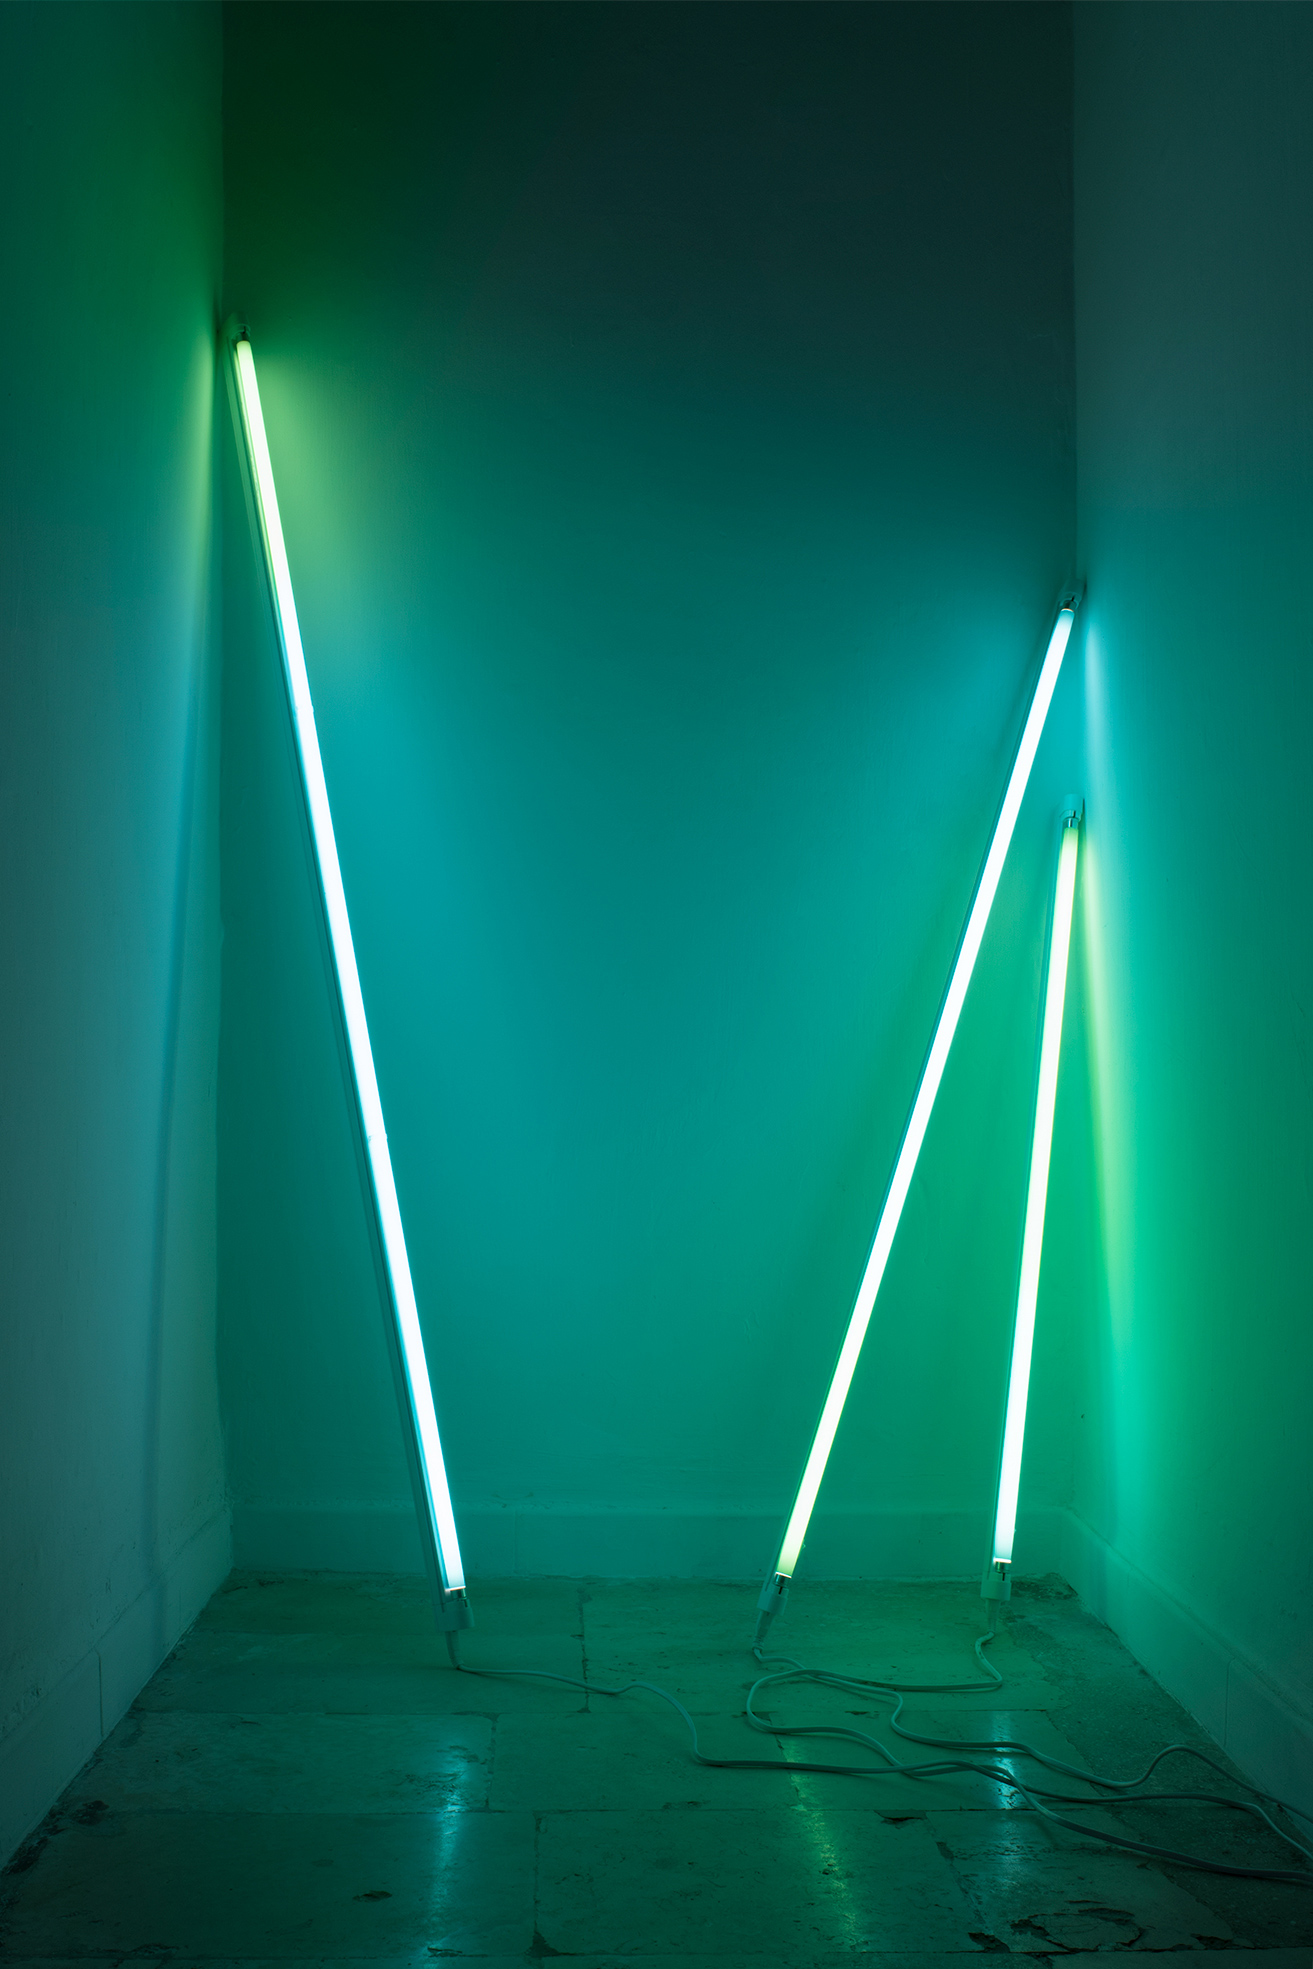 David Stjernholm, The beat effect, The beat effect, Digital printing on transparent film, neon tubes, variable dimensions, 2013/2018.